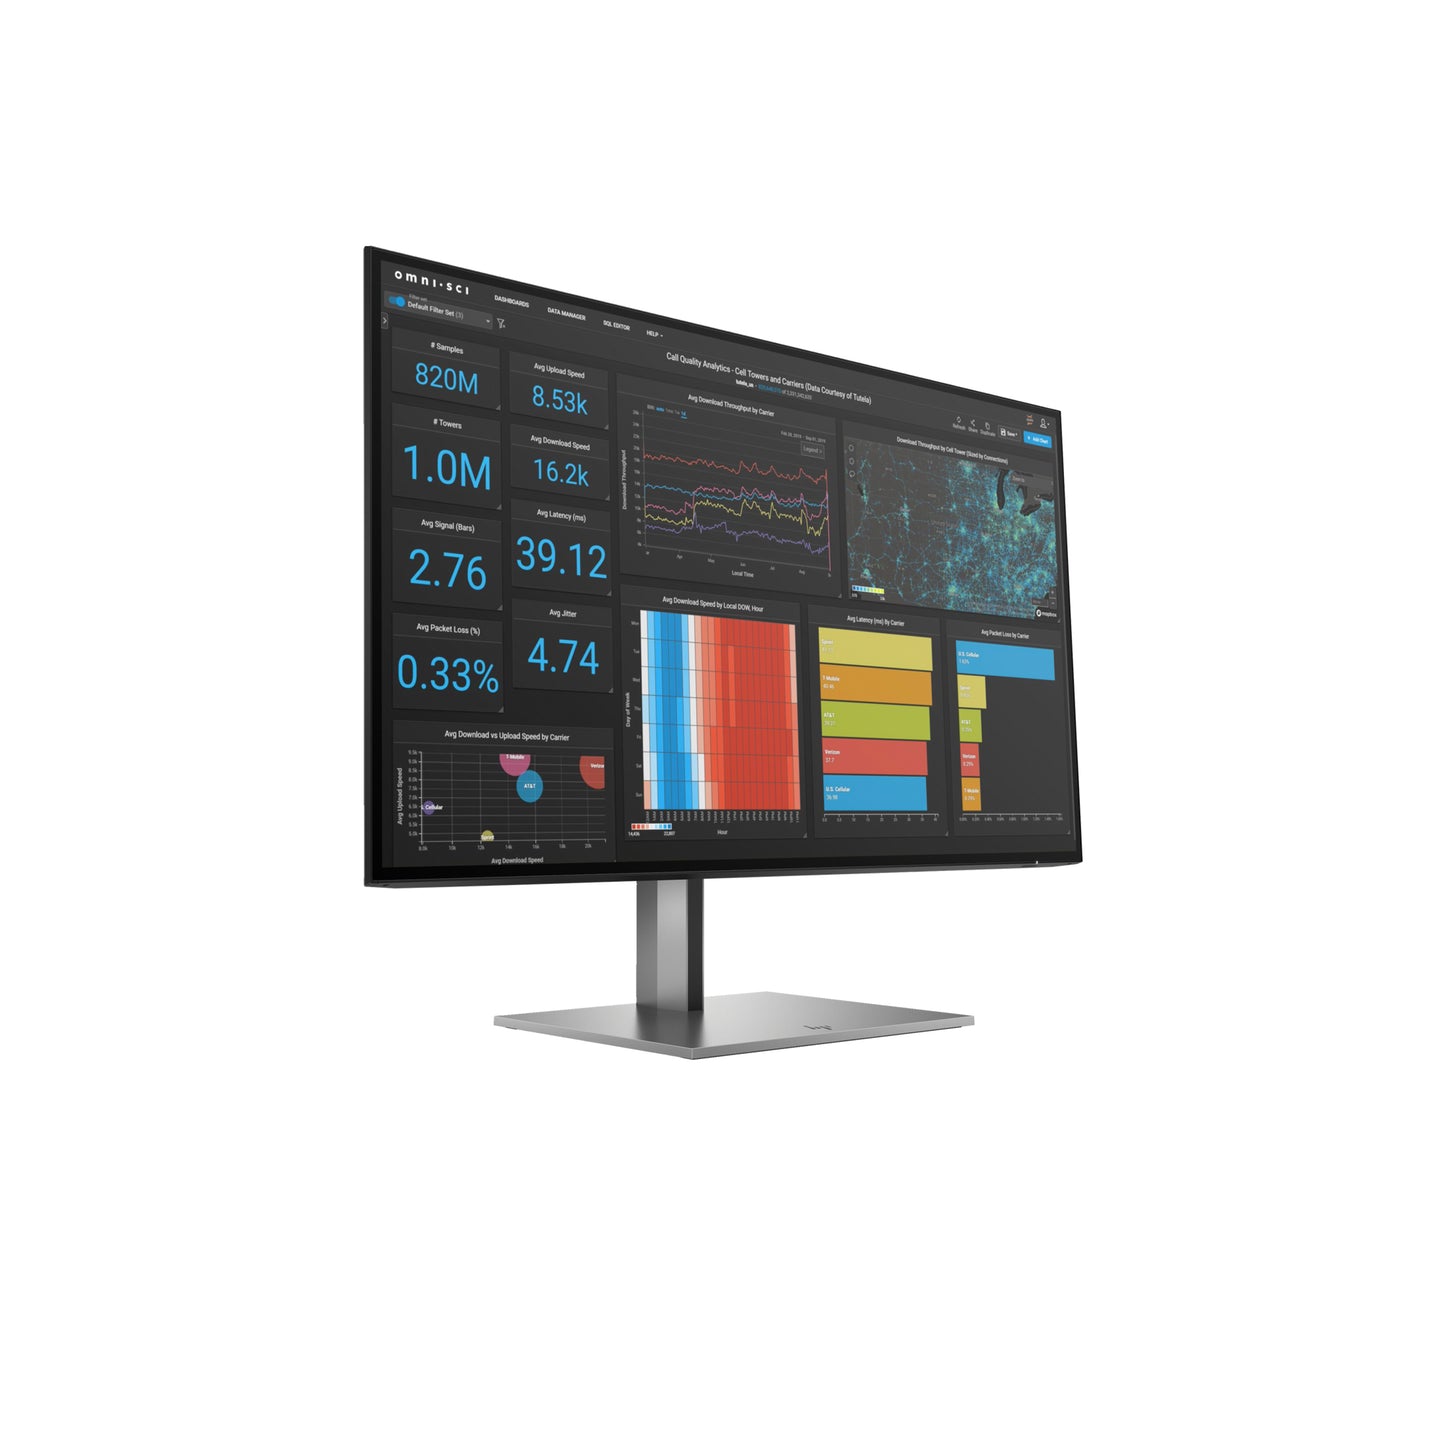 HP Z27Q G3 IPS QHD 16:9 Display 1C4Z7AA#ABA Bundle With Docztorm Dock, 27" QHD (2560 x 1440) 60 Hz Anti-Glare IPS Display, HDMI, Displayport, Height Adjustable, Ideal for Home and Business (Pack of 2)